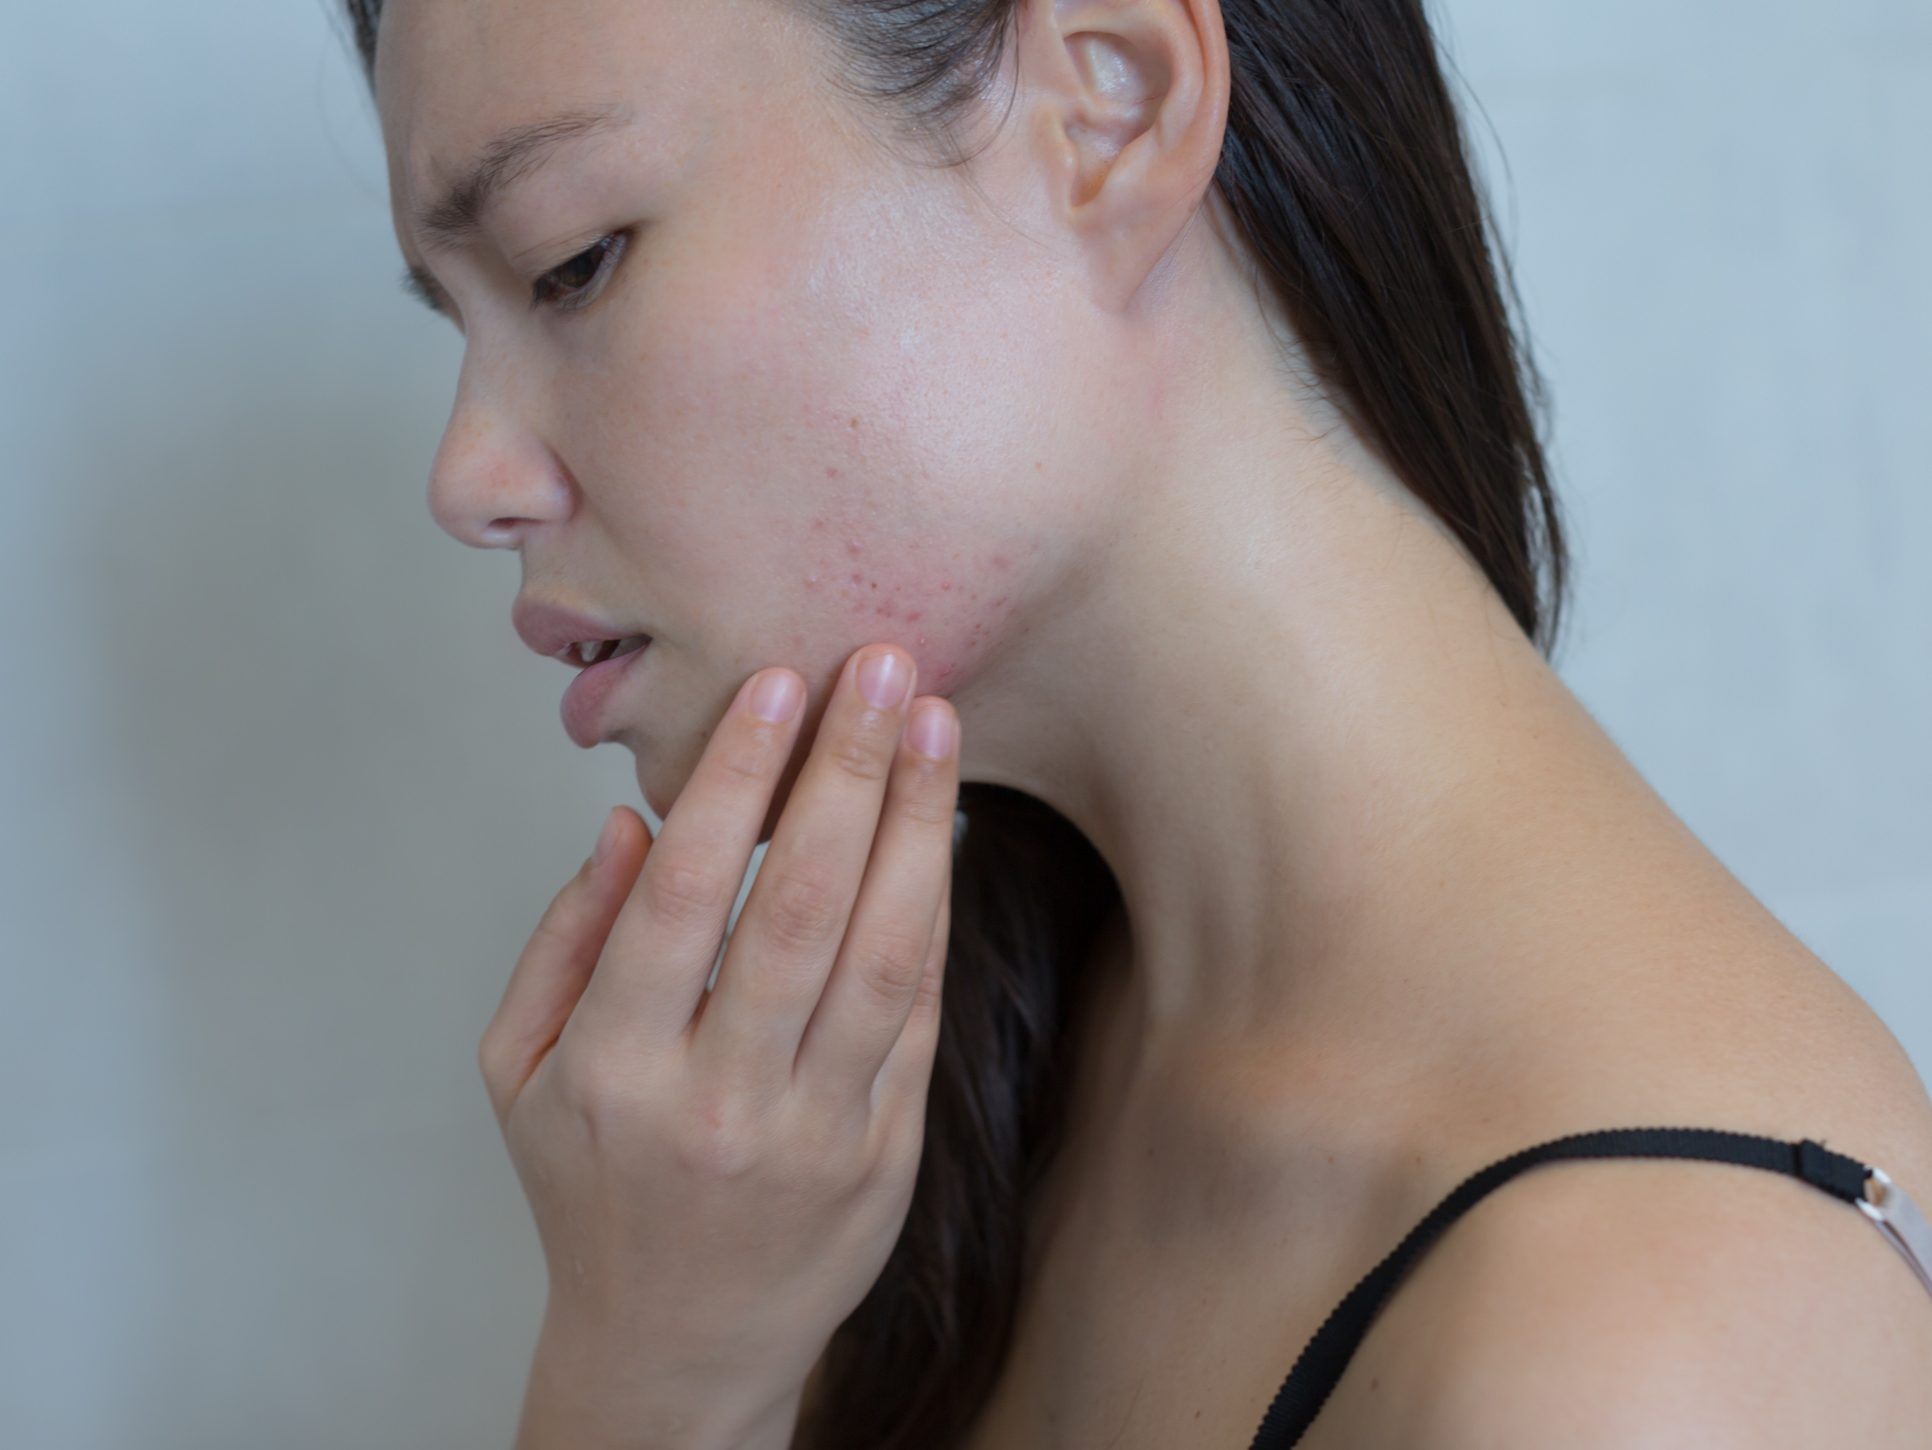 A woman touching her pimples on her cheeks with a worried expression.